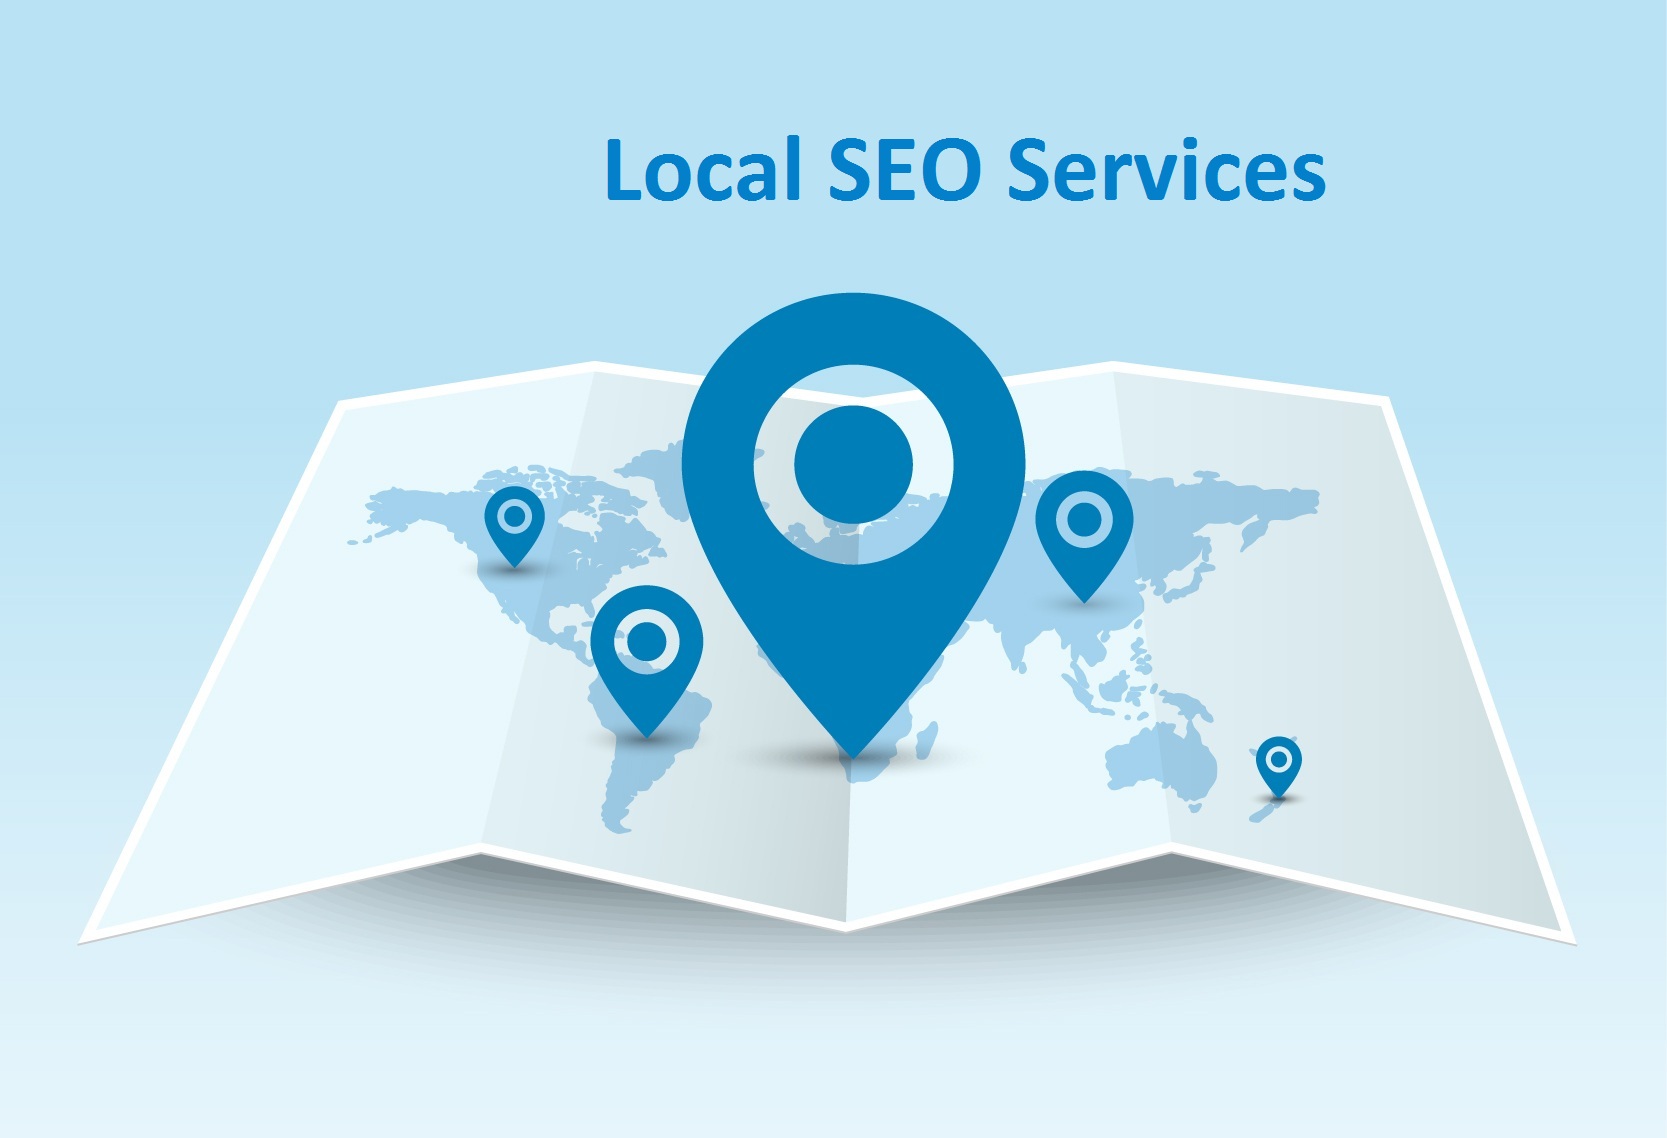 How to Measure the Success of Local SEO Services?